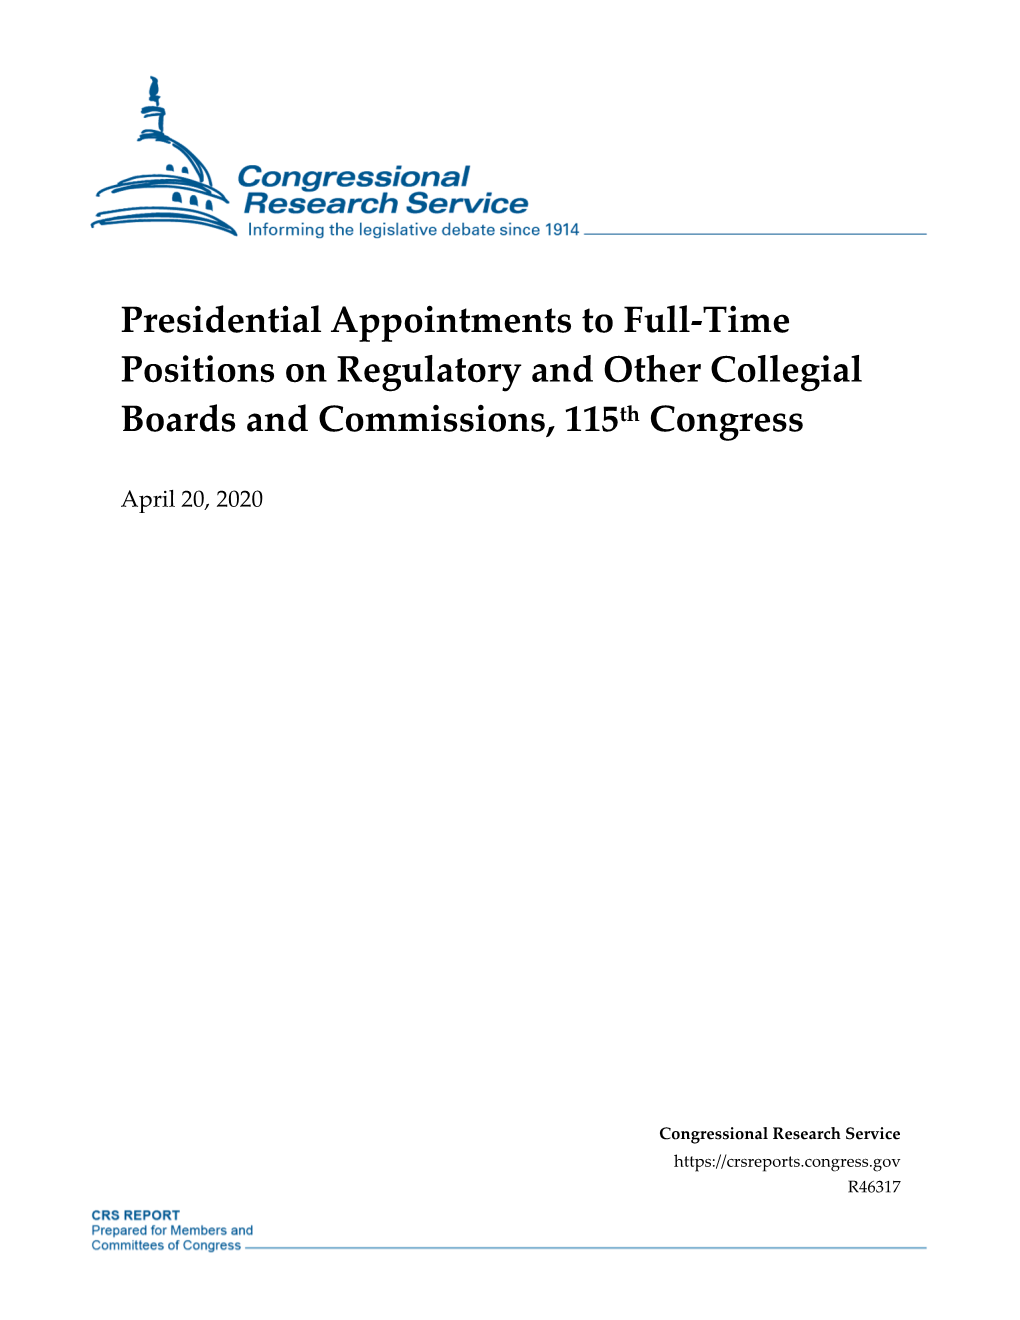 Presidential Appointments to Full-Time Positions on Regulatory and Other Collegial Boards and Commissions, 115Th Congress